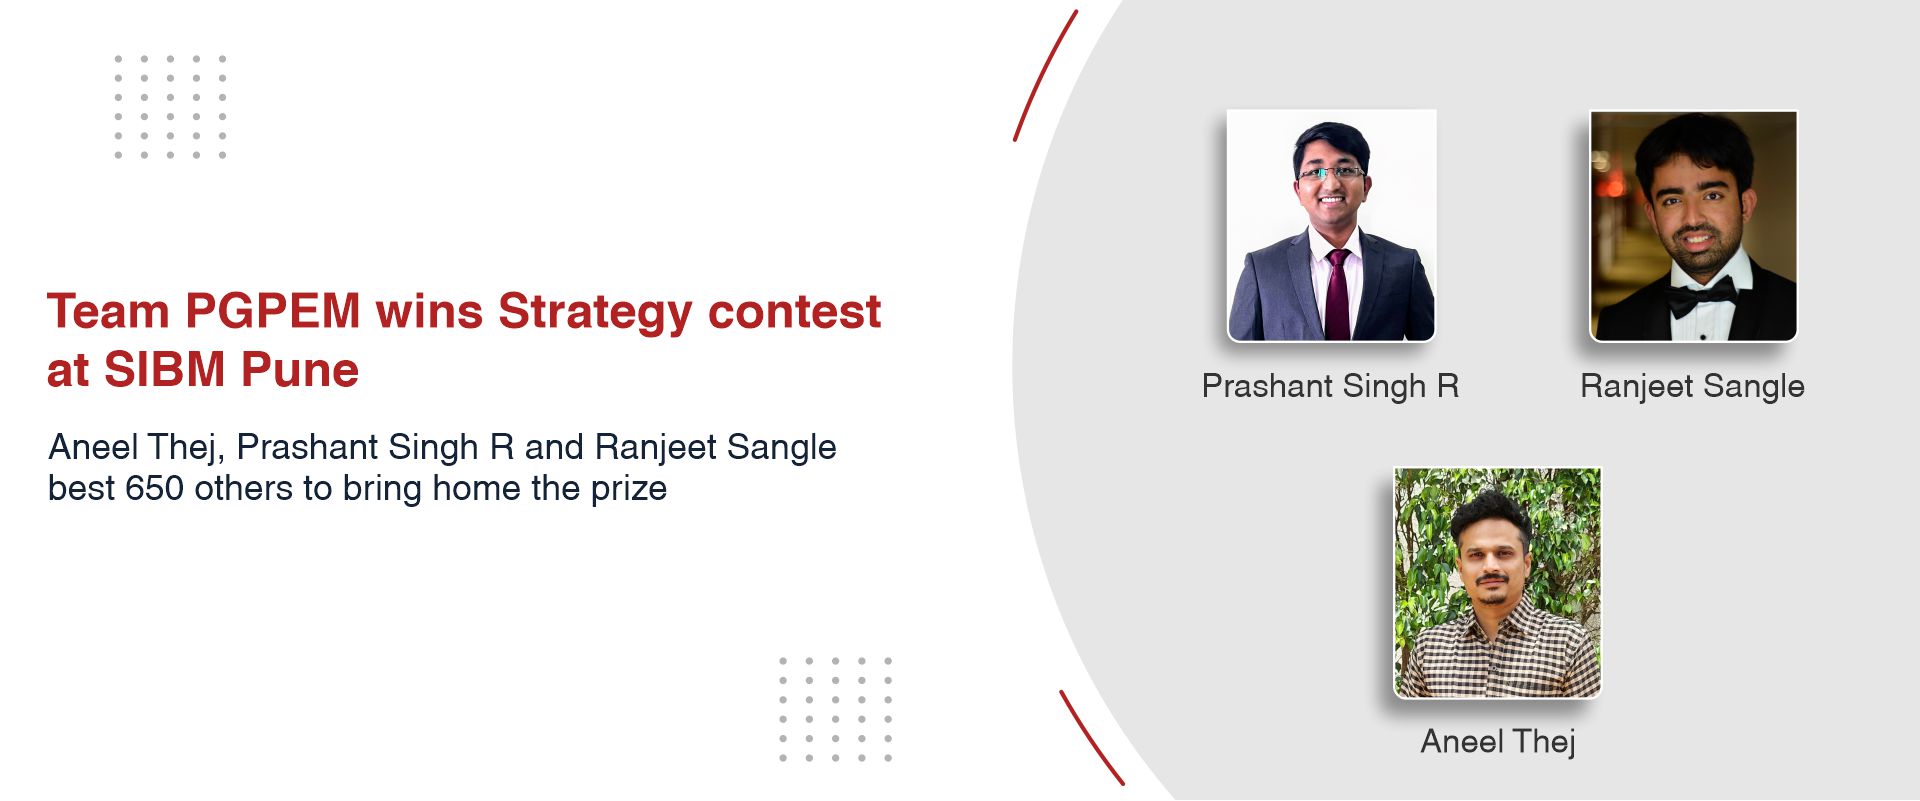 Team PGPEM wins Strategy contest at SIBM Pune